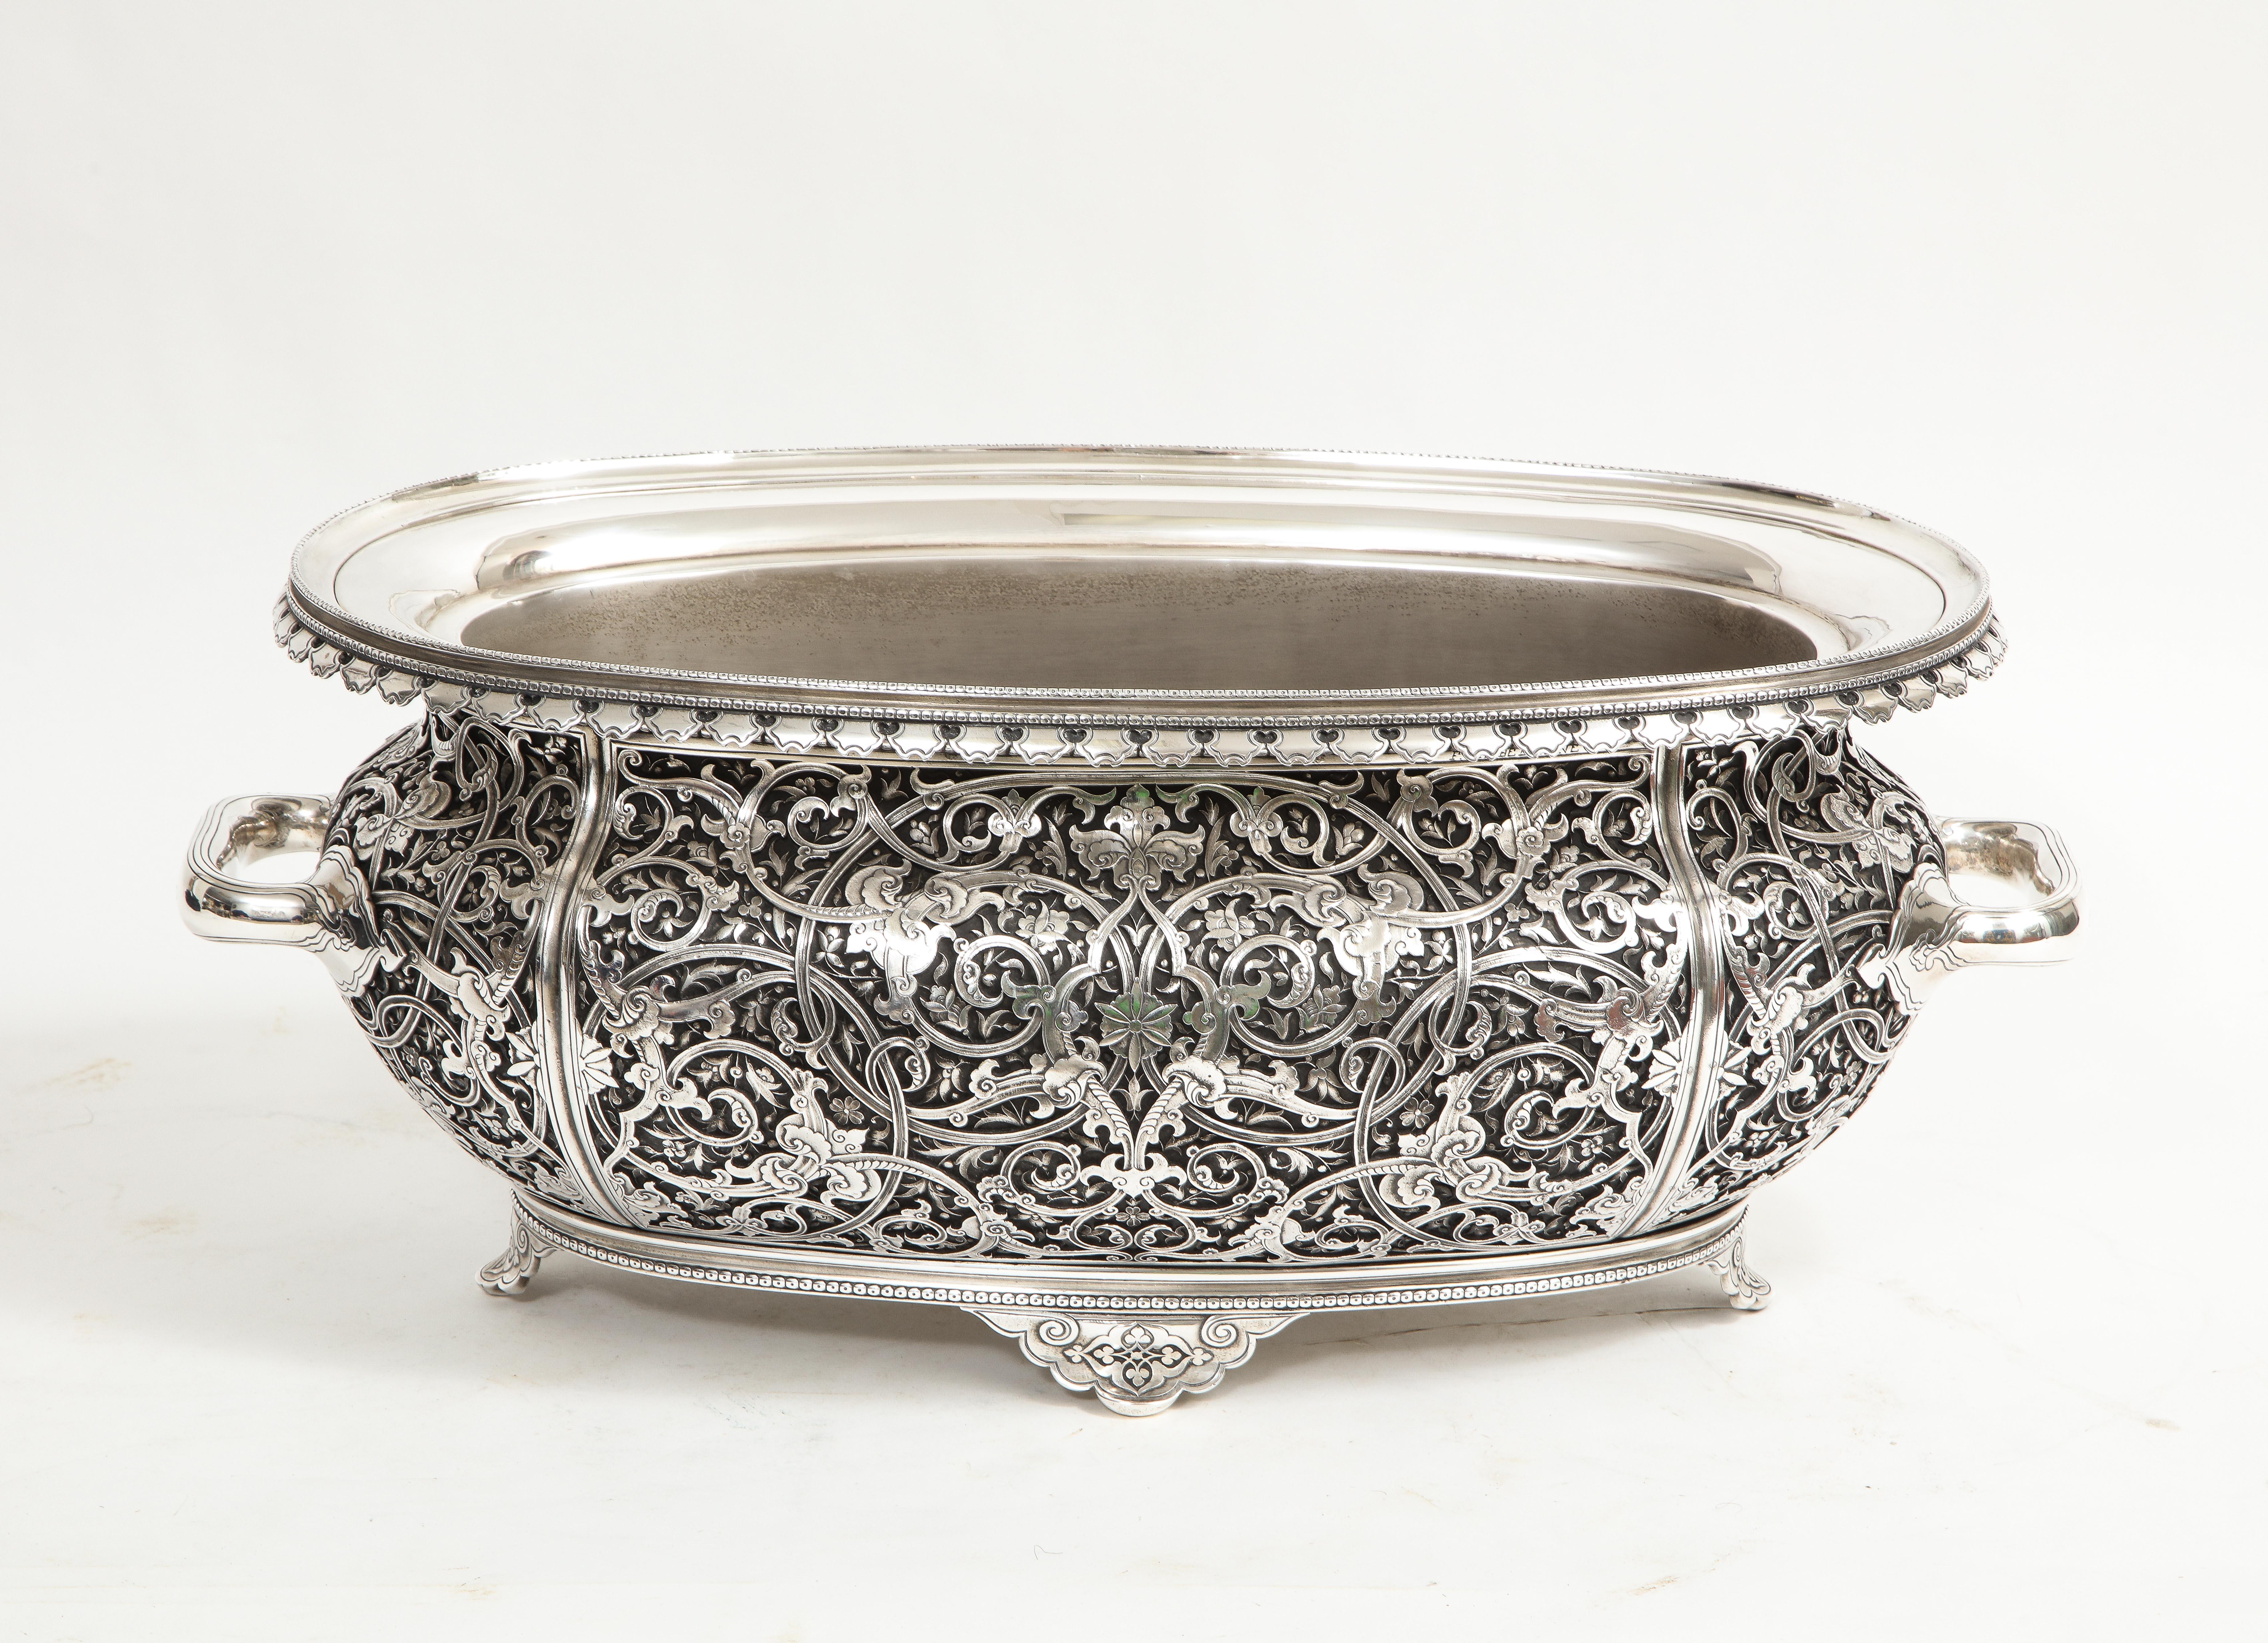 A Fantastic and Quit Large 19th Century French Silvered Bronze Islamic Arabesque and Floral Motif Centerpiece/Decorative Bowl, Attributed to Édouard Lièvre. This piece is extremely detailed with Islamic Arabesque and floral motifs in variable